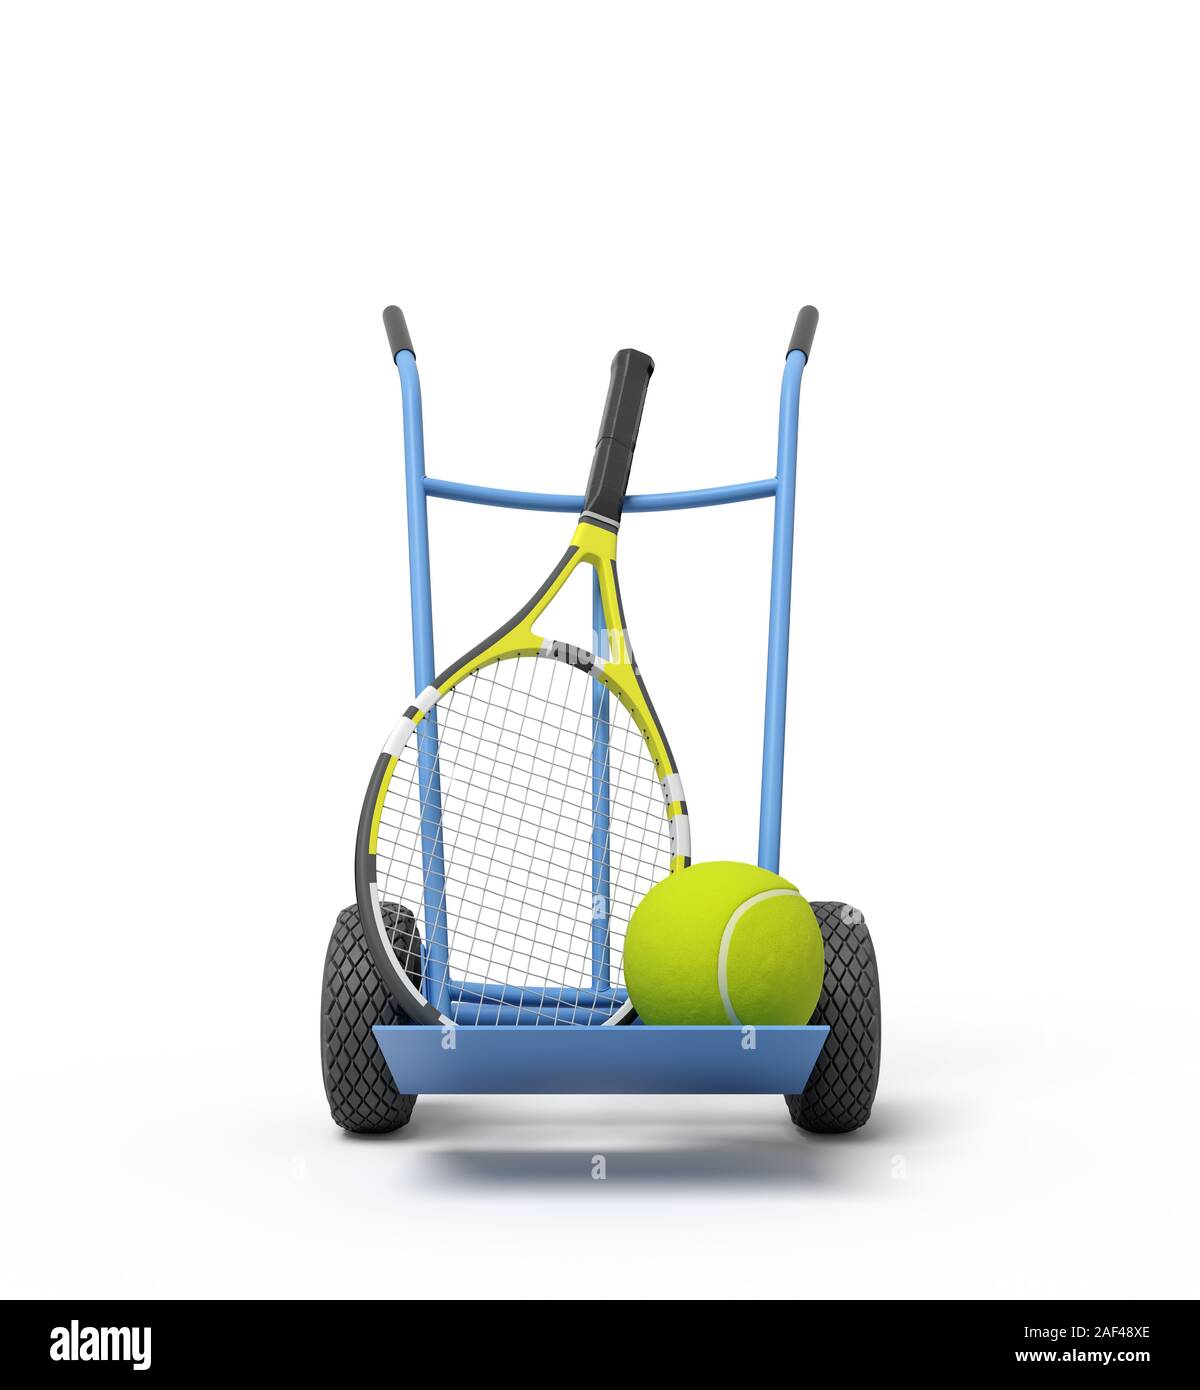 3d rendering of navy blue hand truck standing upright in half-turn with tennis ball and racket on it. Sporting equipment. Keep fit. Tennis match. Stock Photo